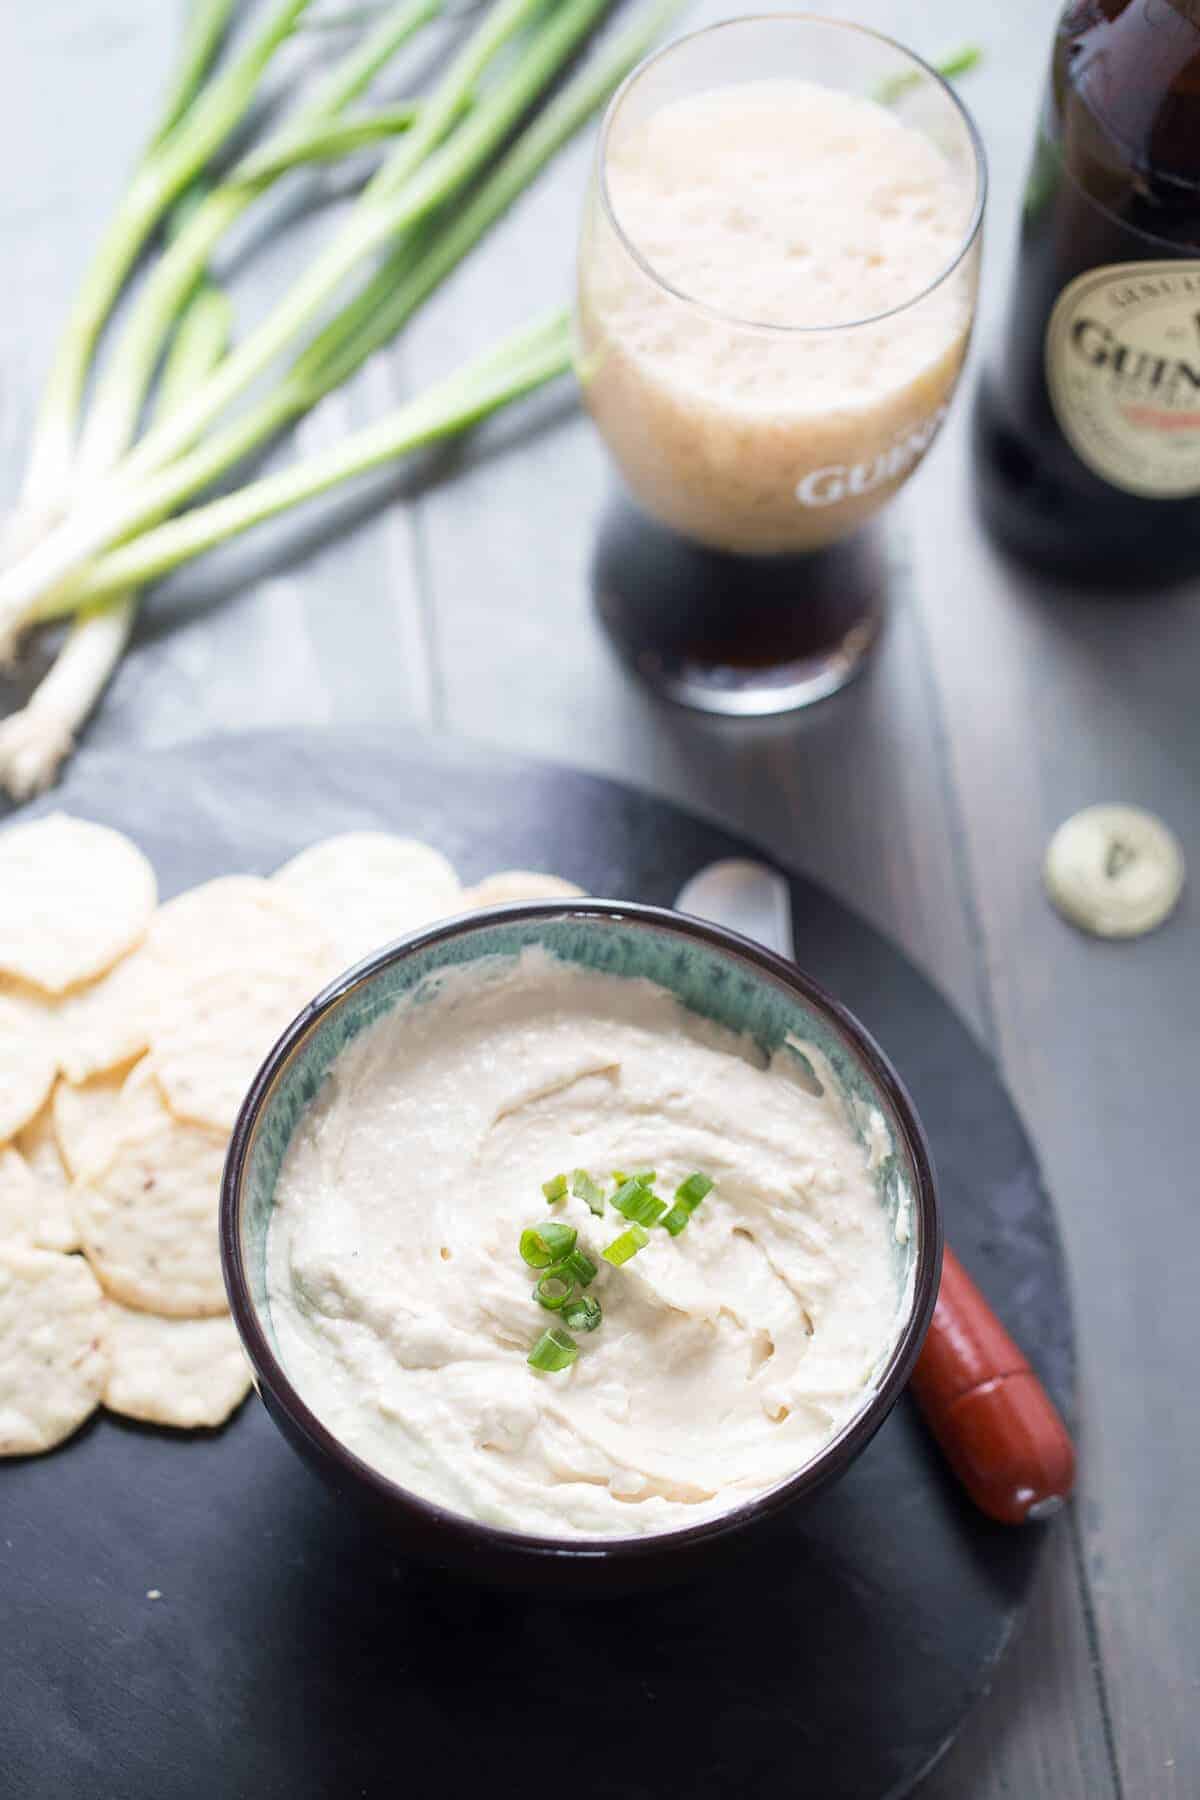 Guinness cheese dip that is a full-bodied flavor! The Guinness makes this dip rich and delicious!